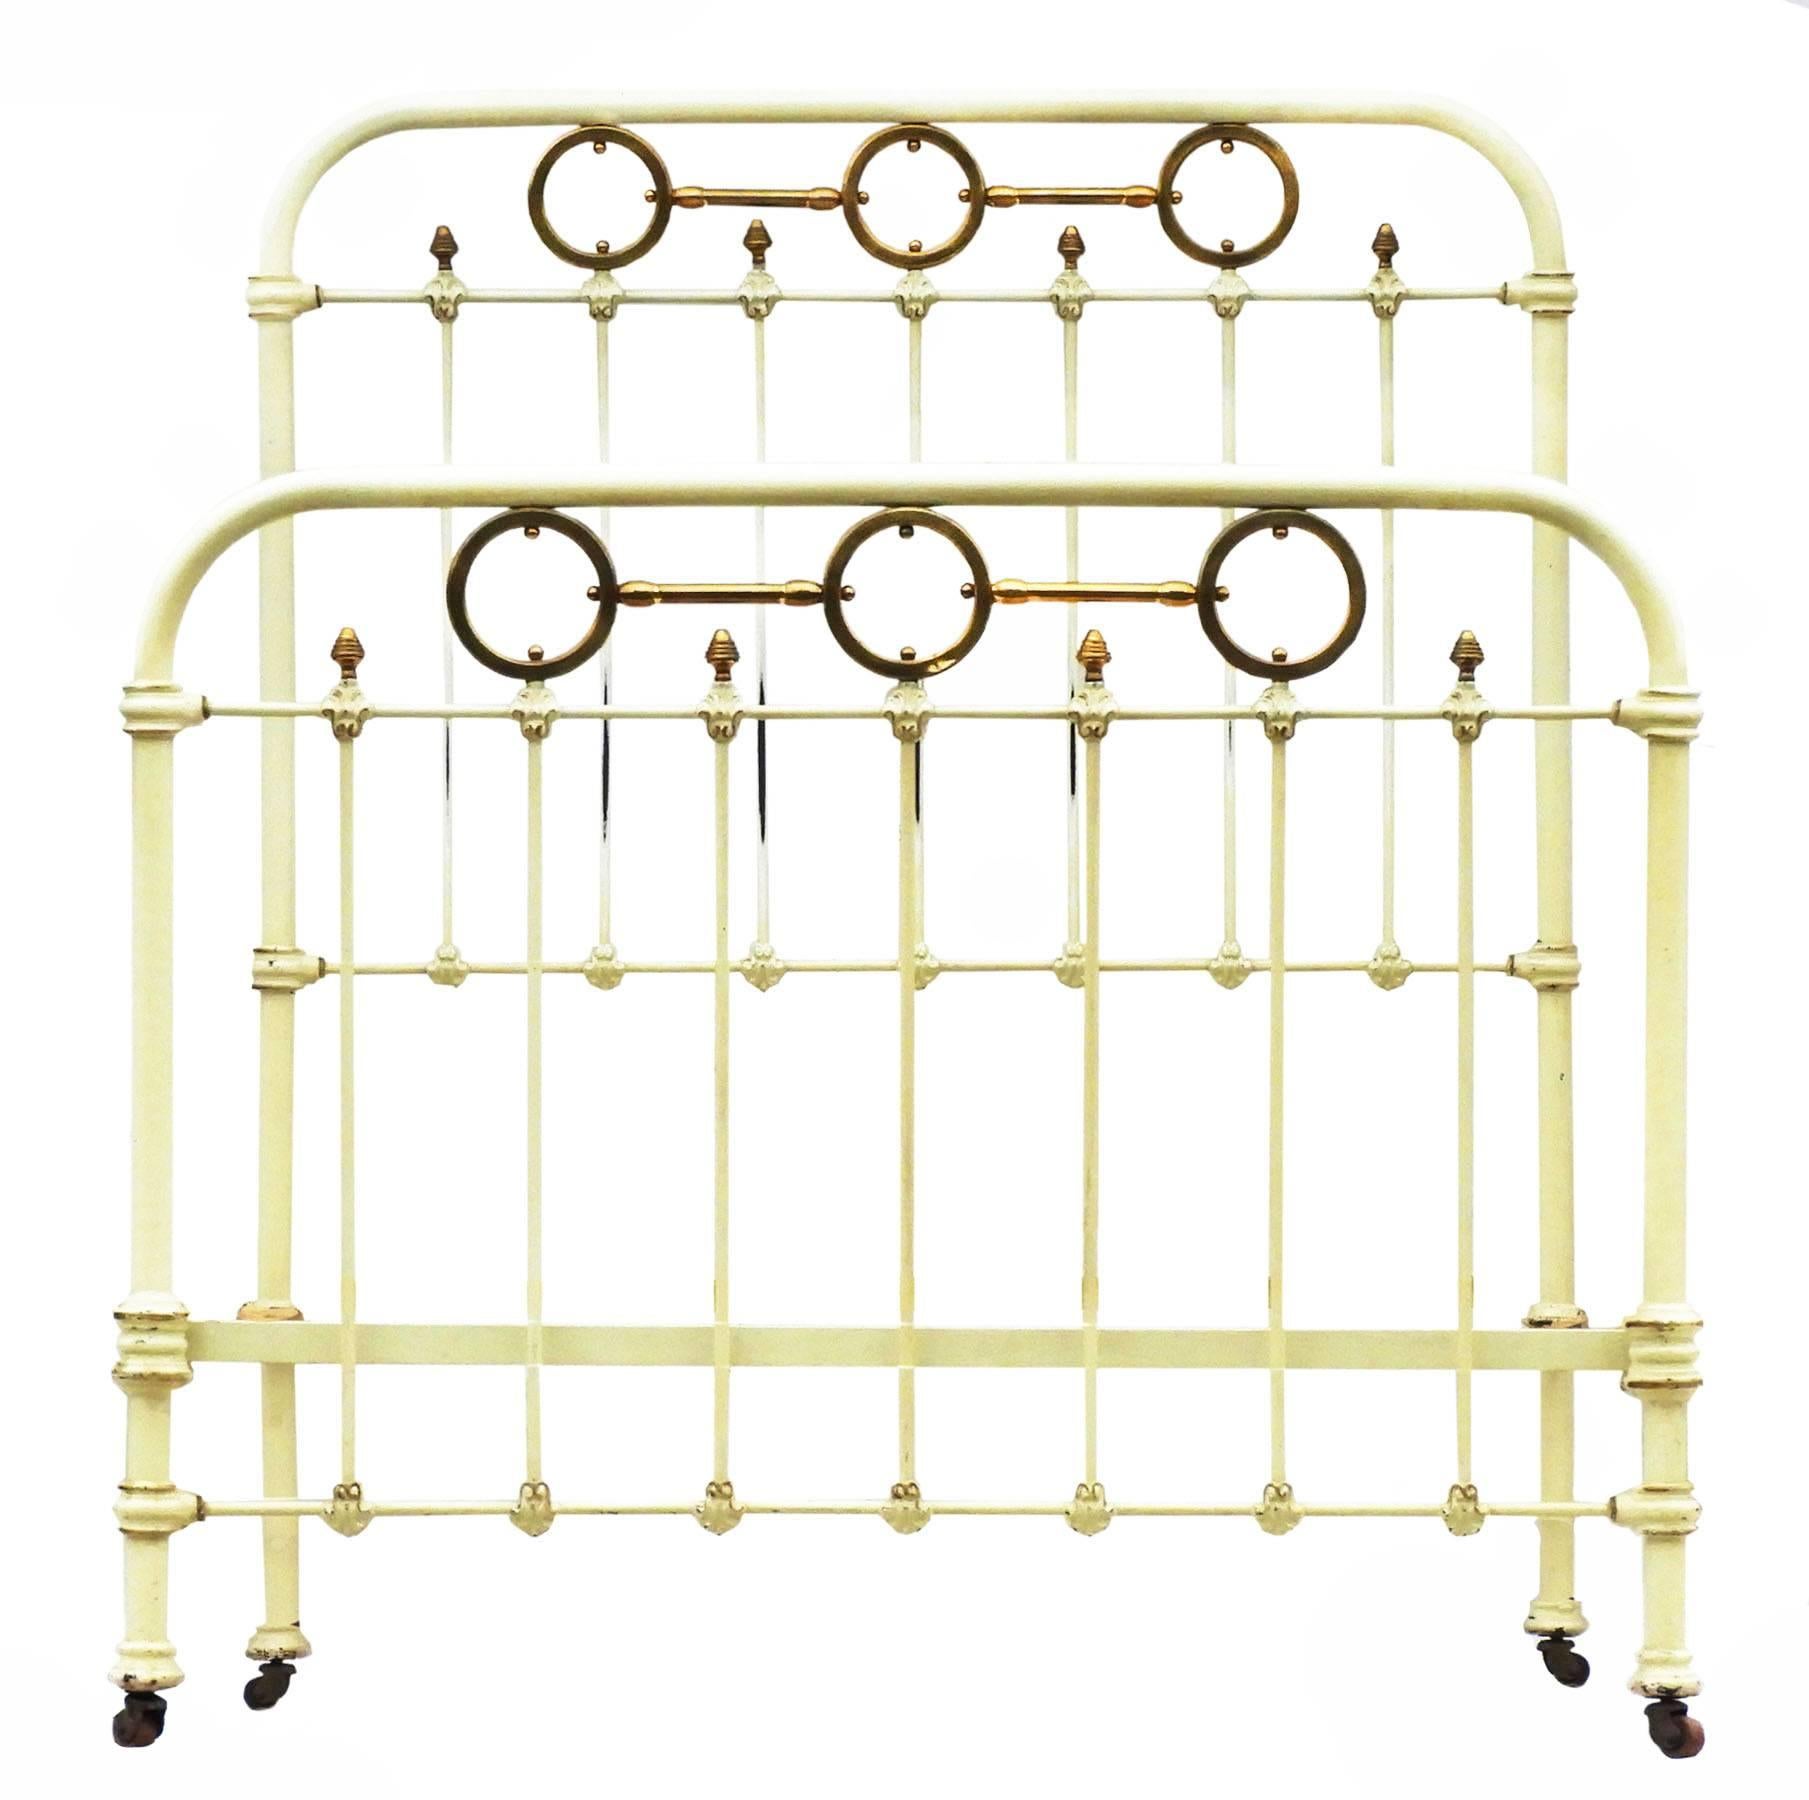 French Iron and Brass single Antique Bed circa 1890 
With Brass Ring Details 
On original castors
This bed will take a 3 foot 6 inch or 45 inch wide mattress on either a slatted wood base or a spring base (not included) please ask for more info